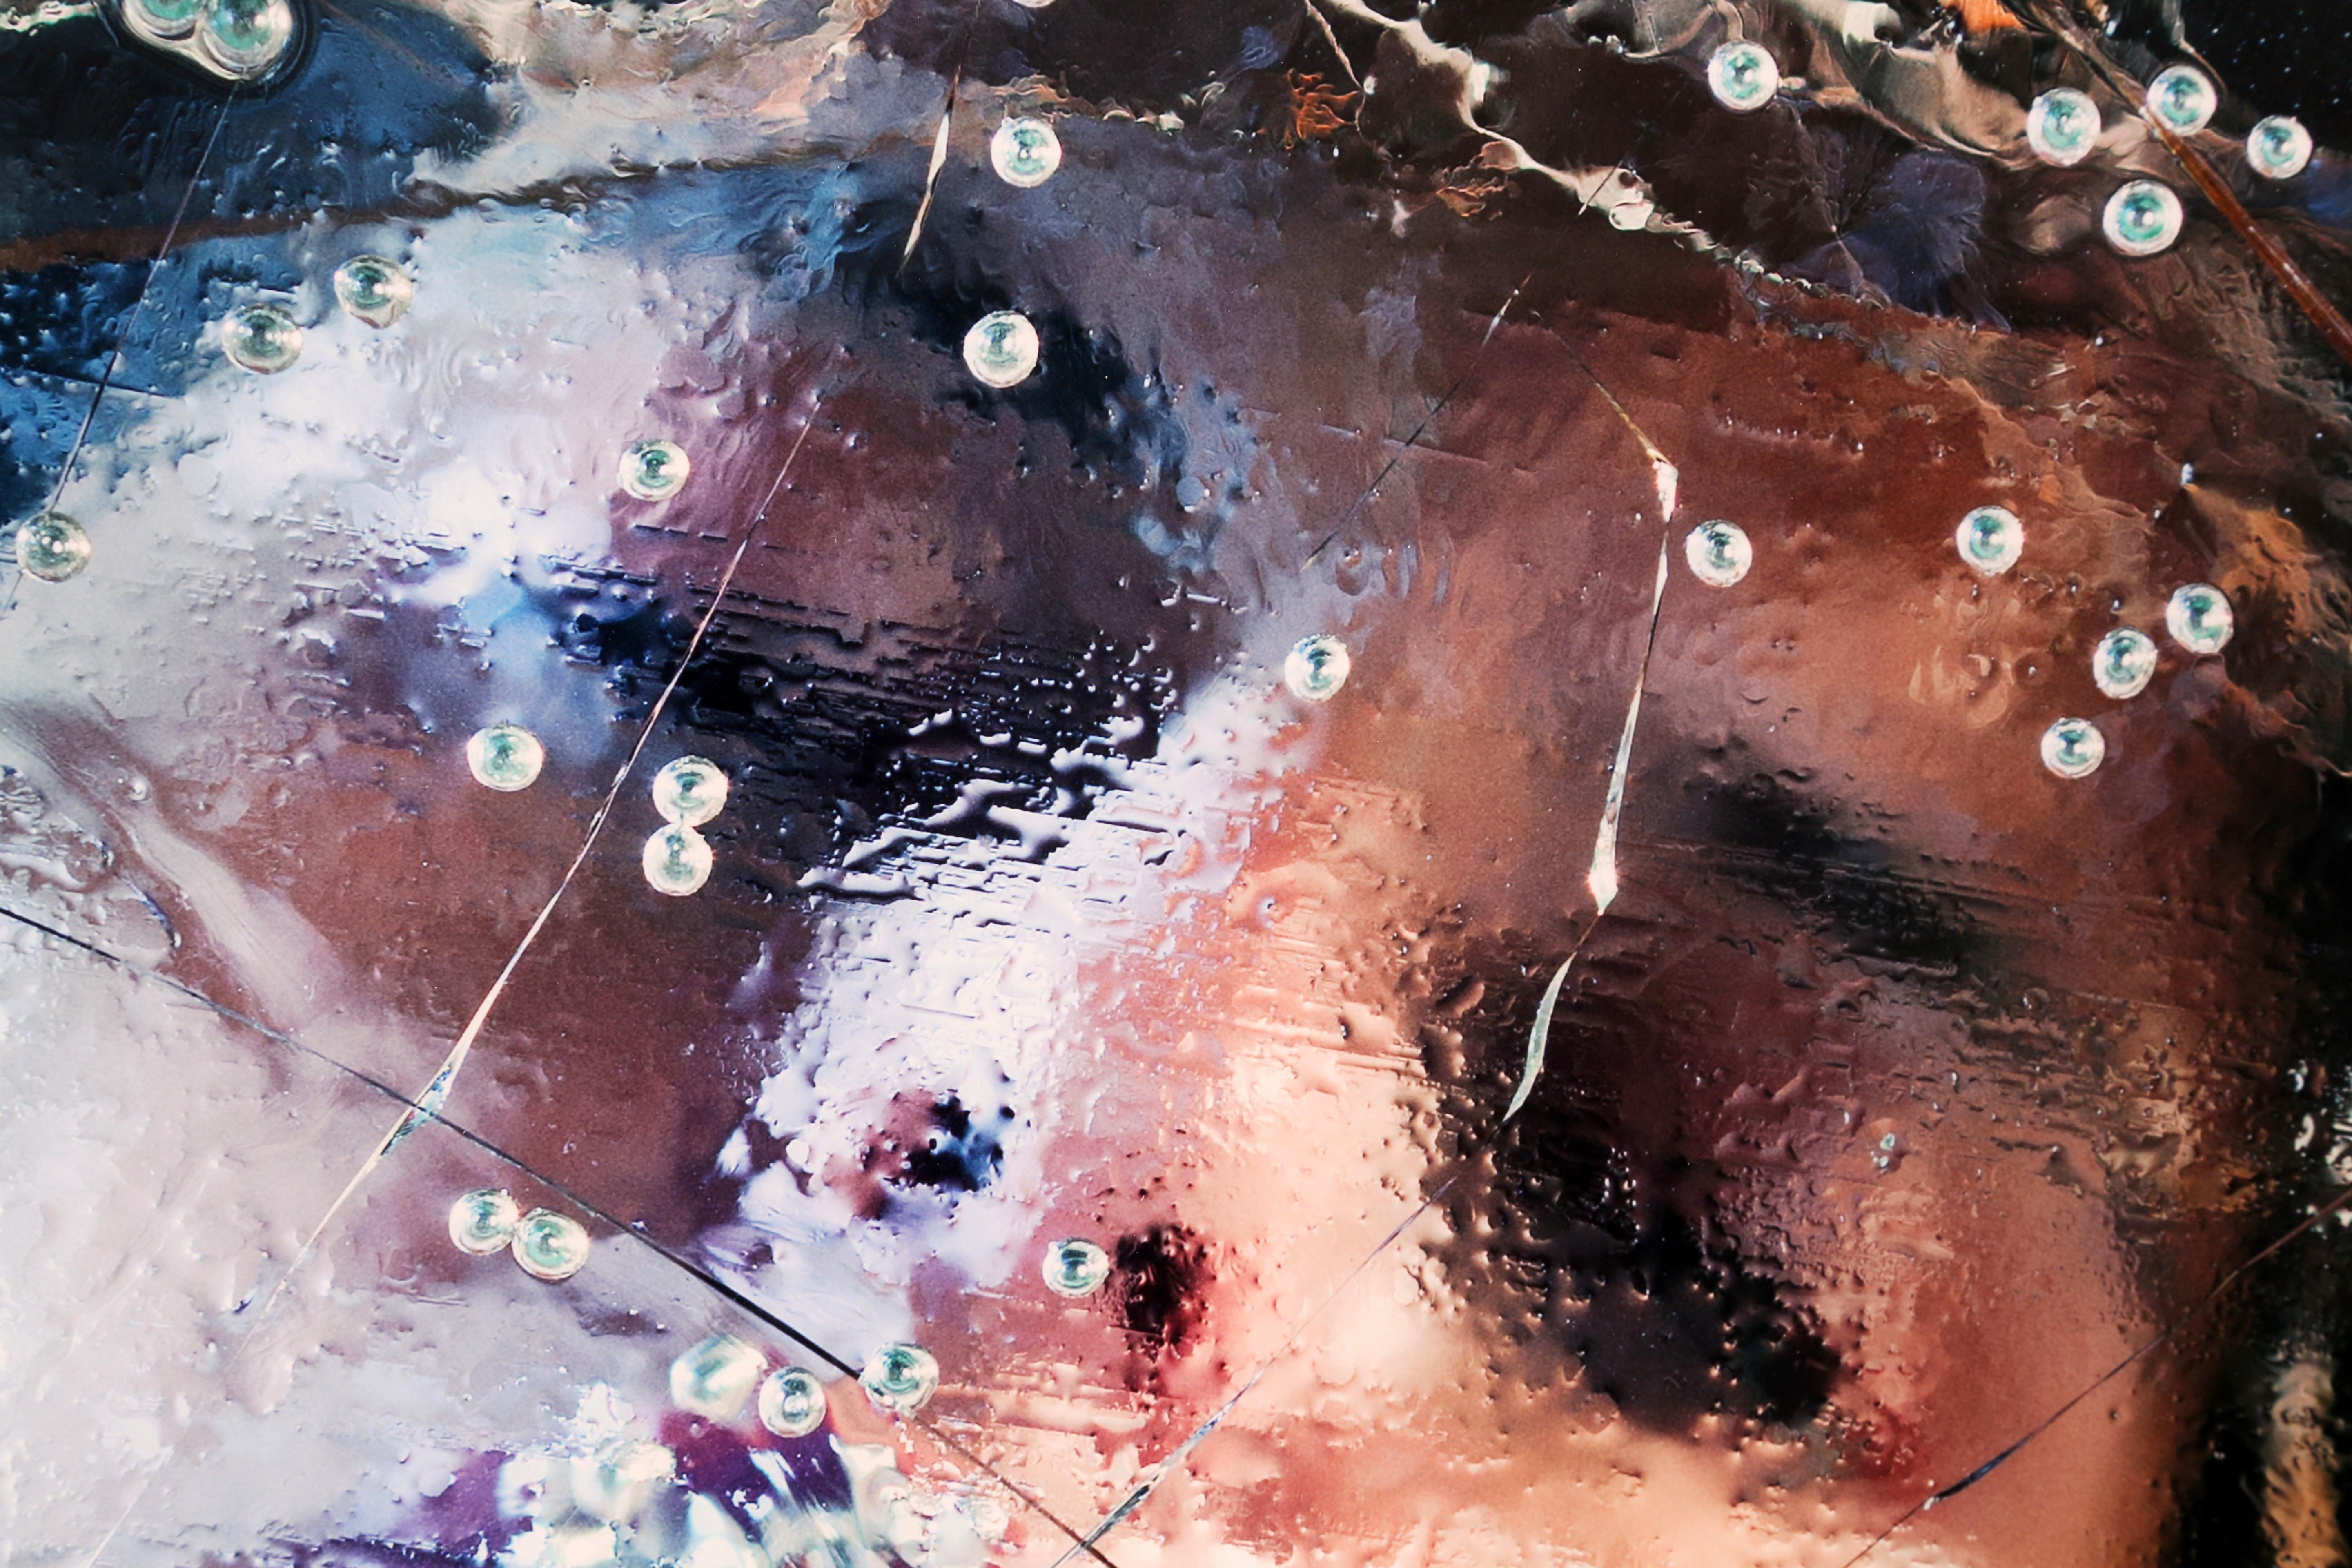 Marilyn Minter
Ball Spitter, 2012
Chromogenic print
Framed Dimensions: 25.75 x 21.75 inches  (65.41 x 55.25 cm)
Image Dimensions: 24 x 20 inches  (61 x 50.8 cm)
Edition 15/20